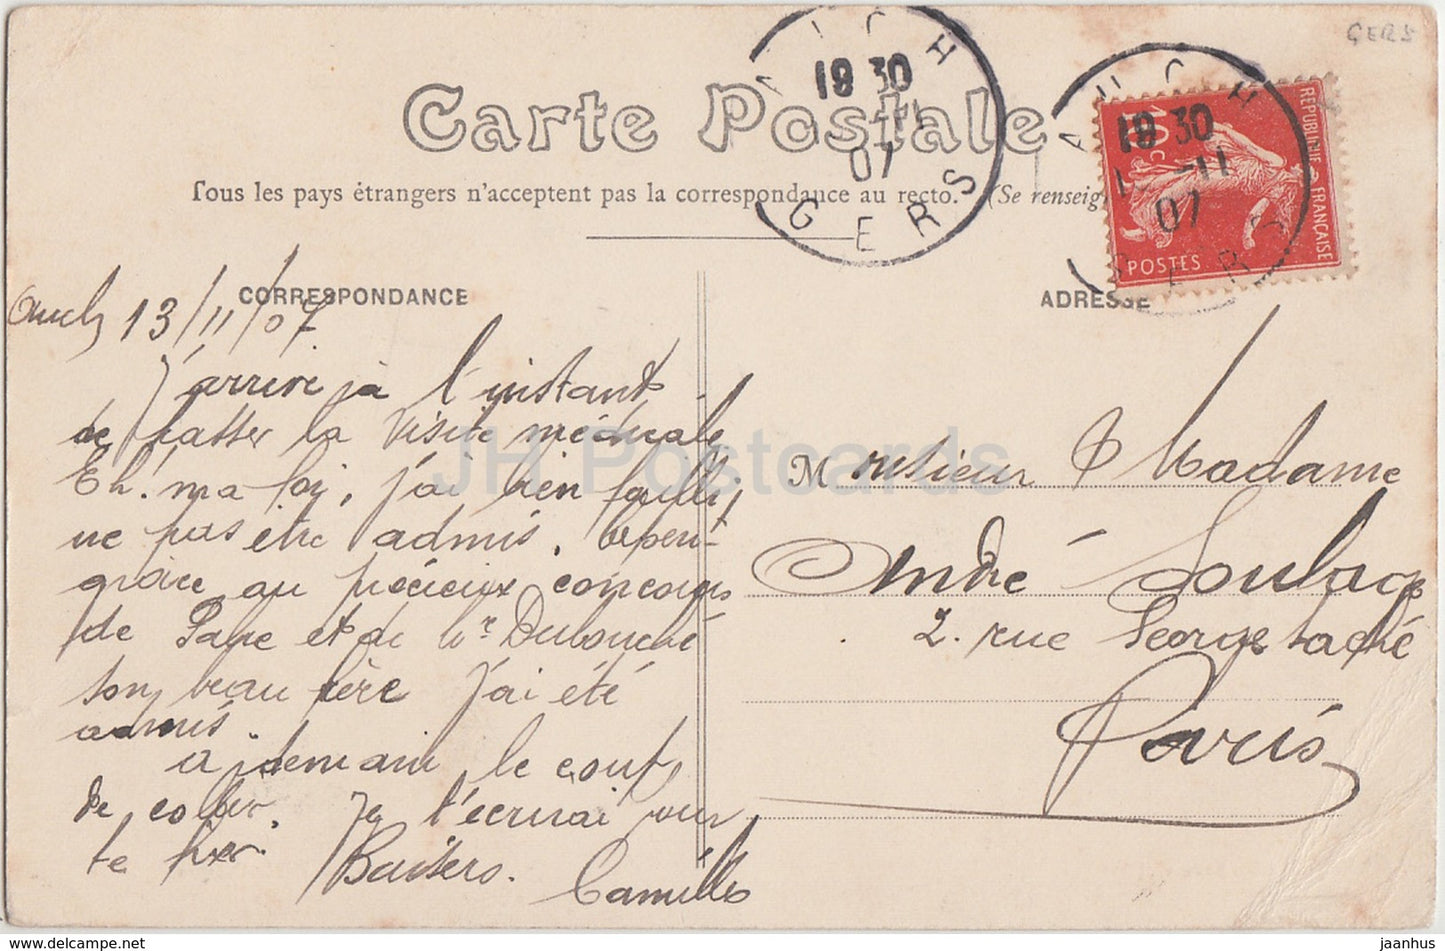 Auch - Bibliotheque - library - 1907 - old postcard - France - used